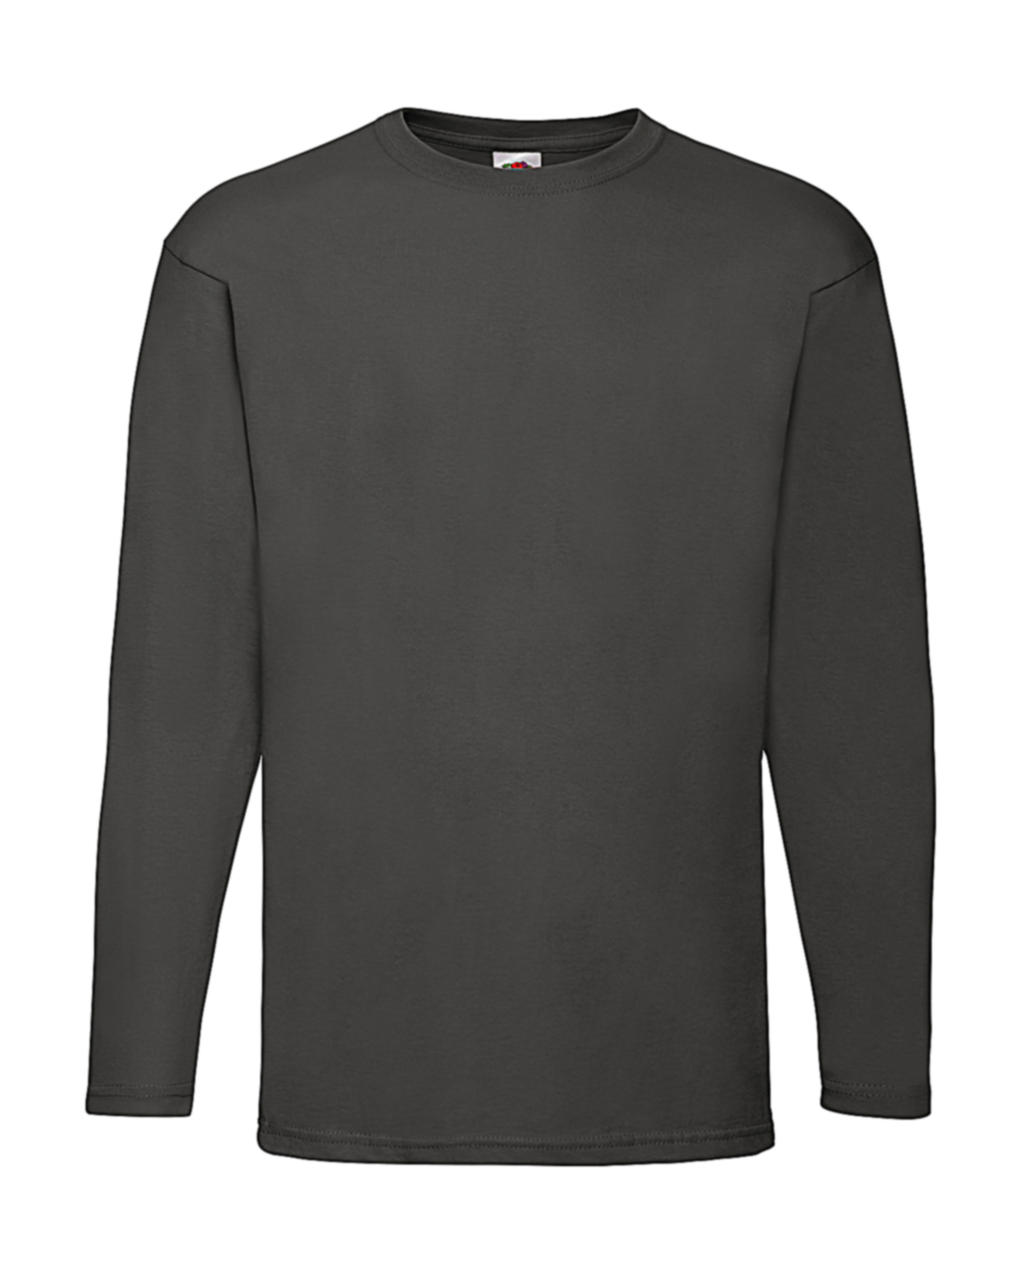  Valueweight LS T in Farbe Light Graphite